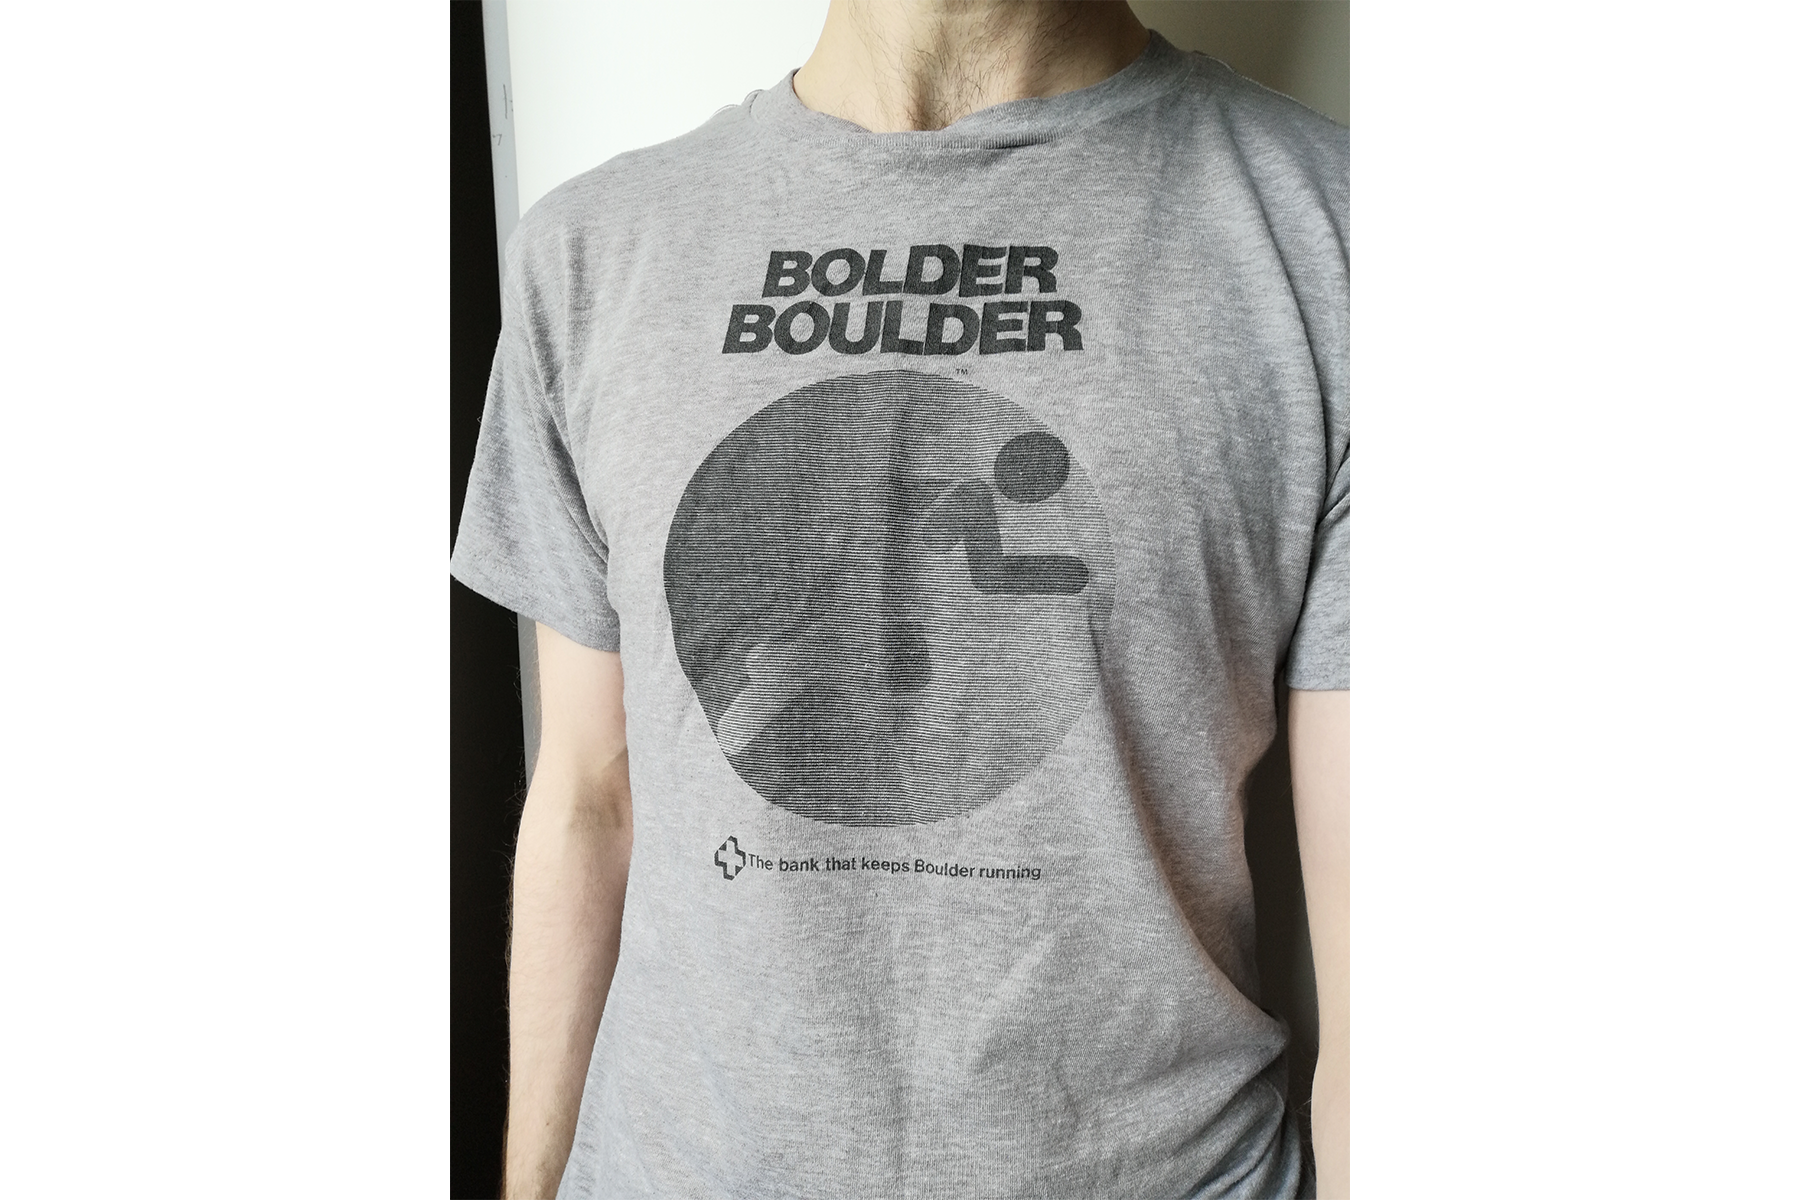 A fan's t-shirt purchased in Kyoto but for the Bolder Boulder annual 10k run in Boulder Colorado